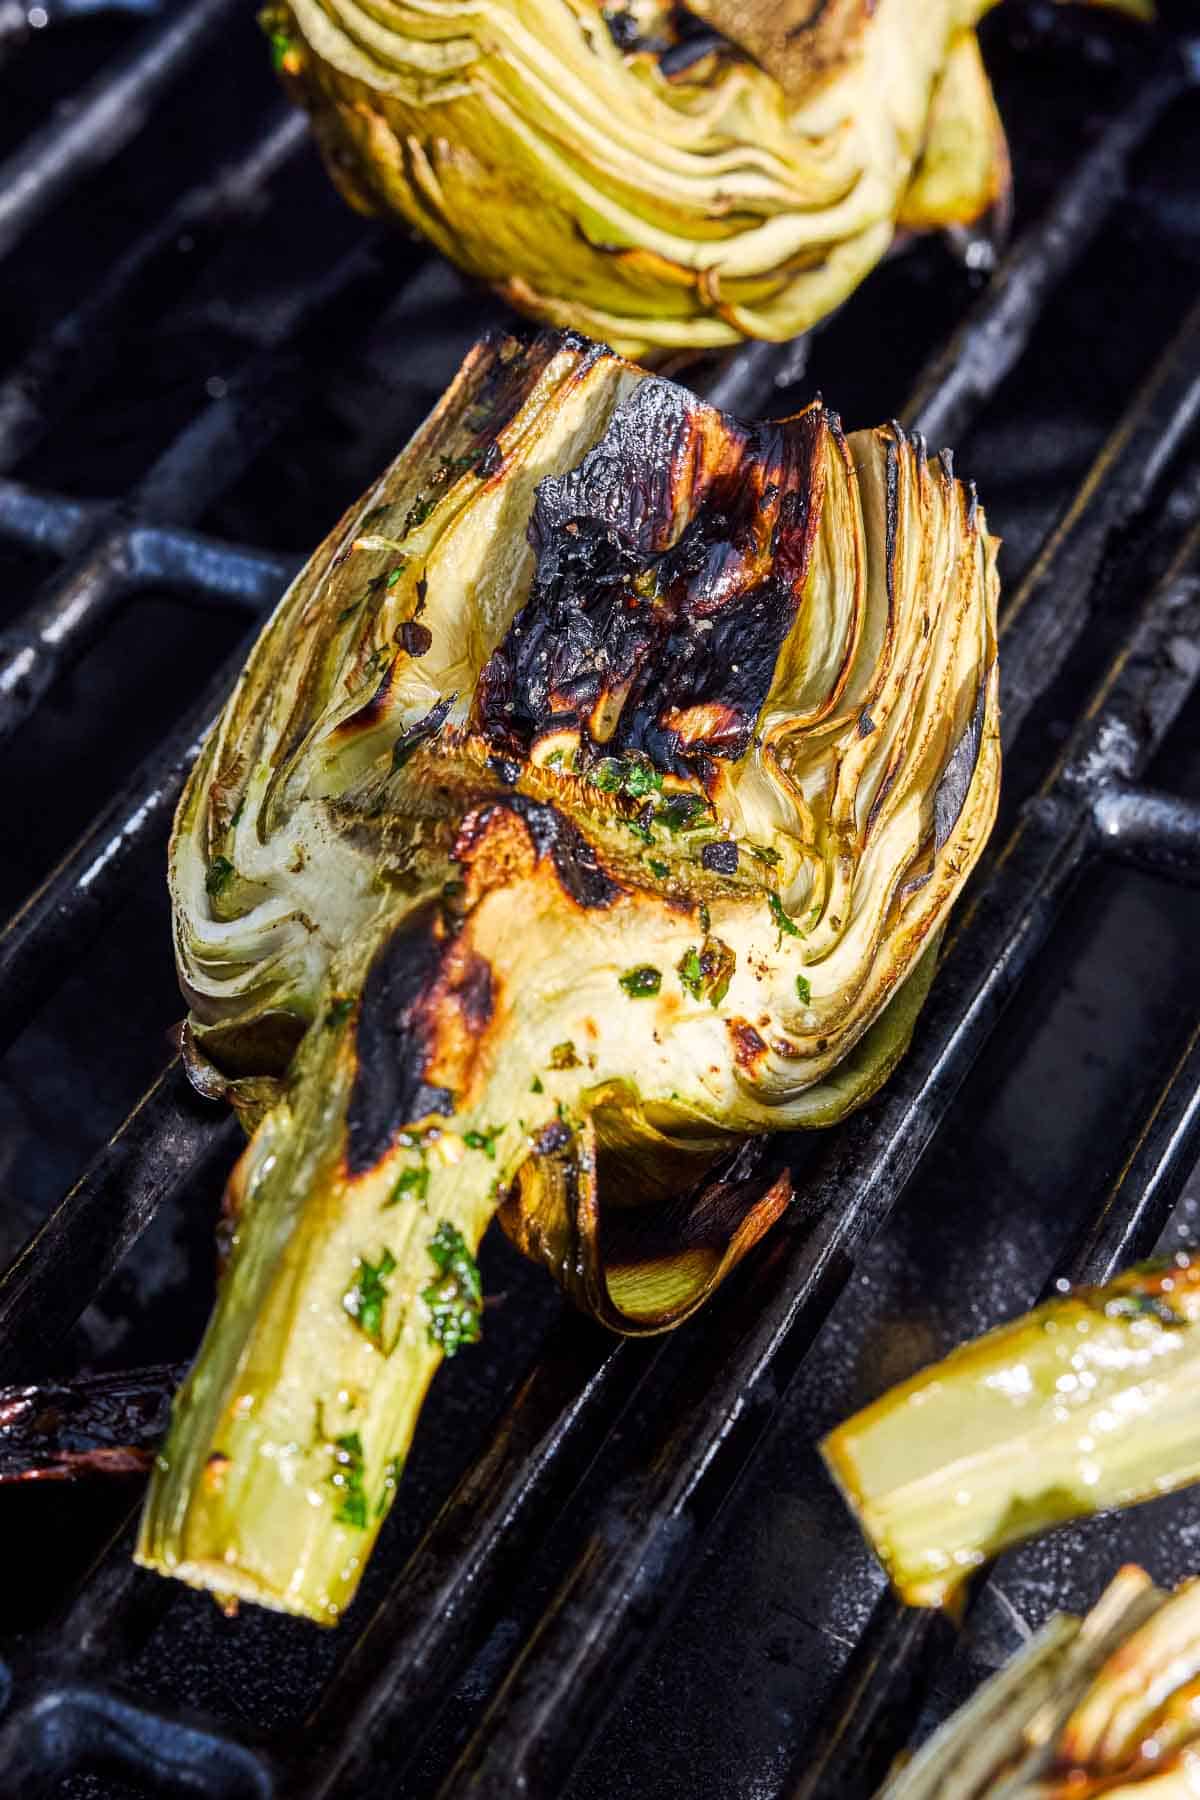 A close up of an artichoke quarter being grilled on a grill.